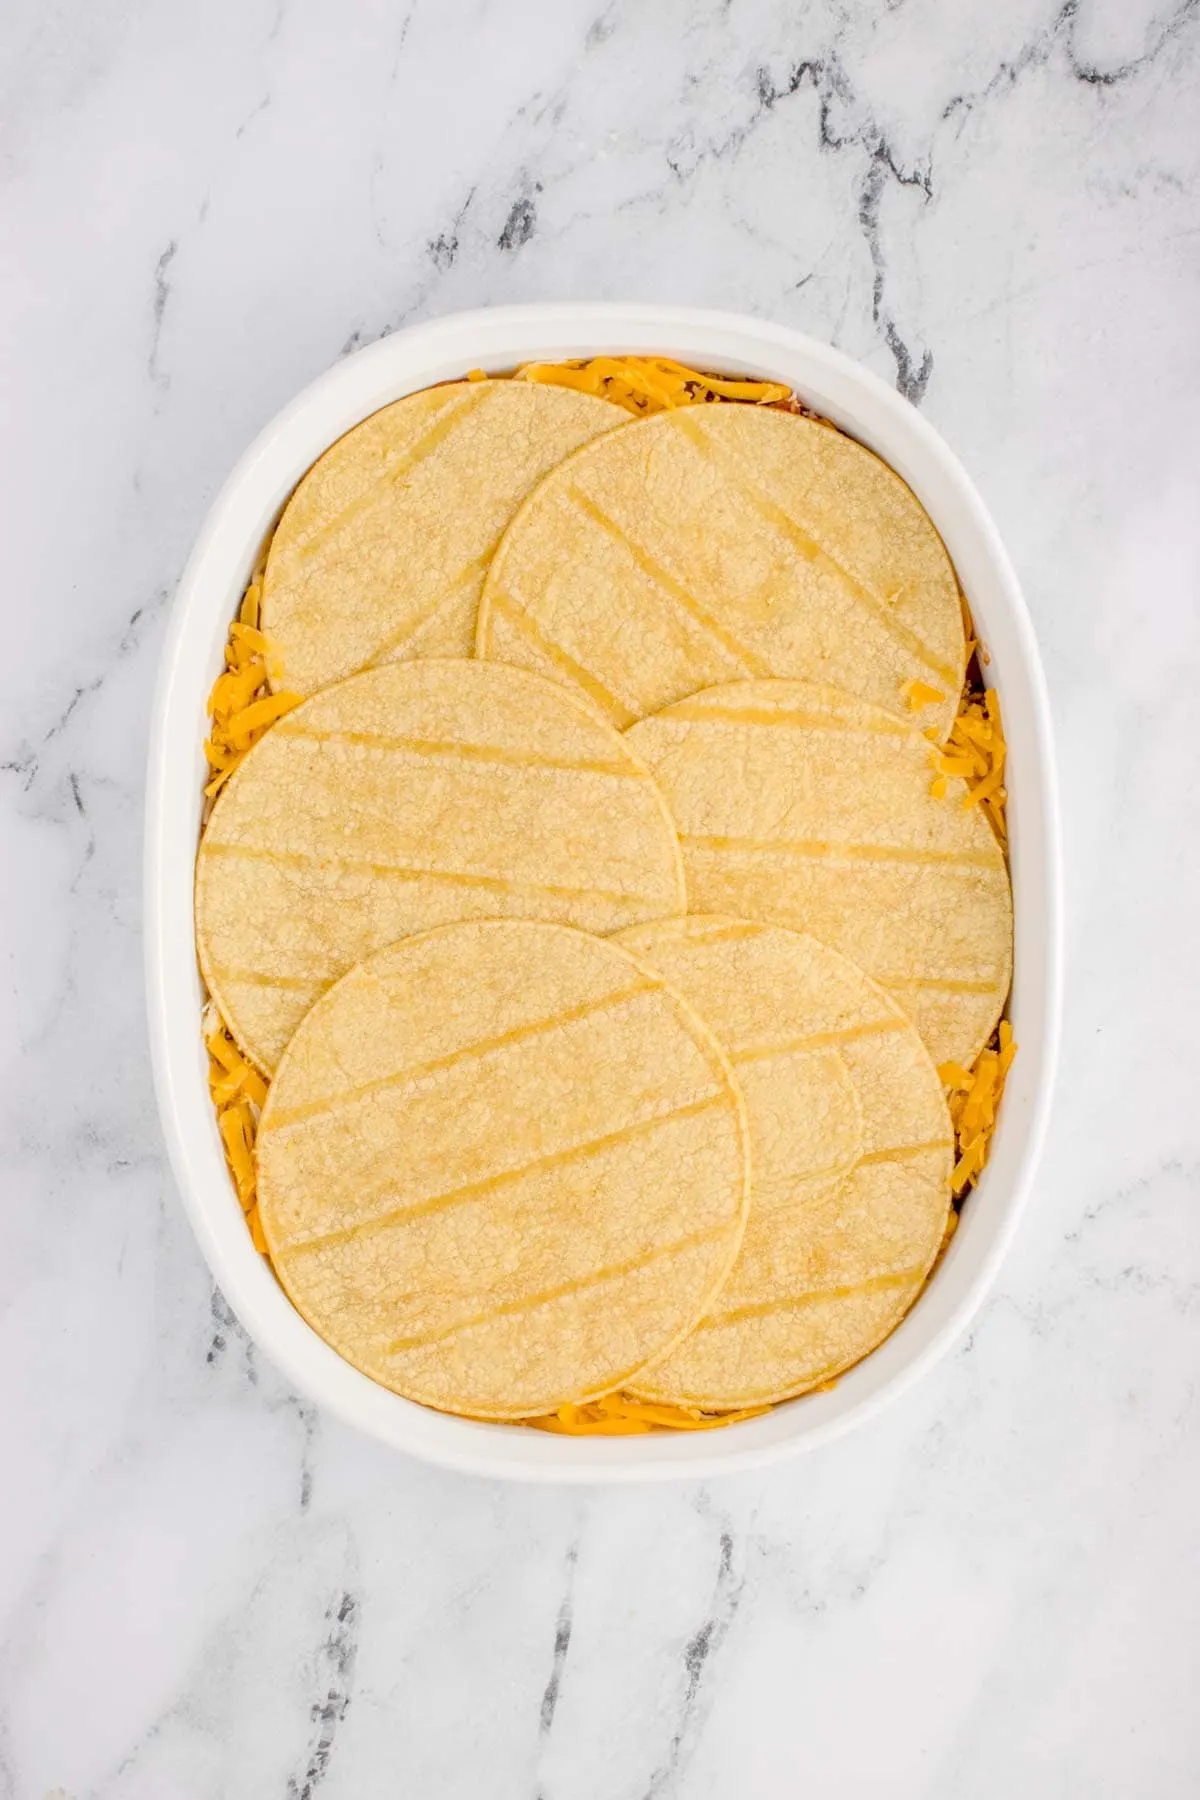 corn tortillas on top of shredded cheese layer in a baking dish